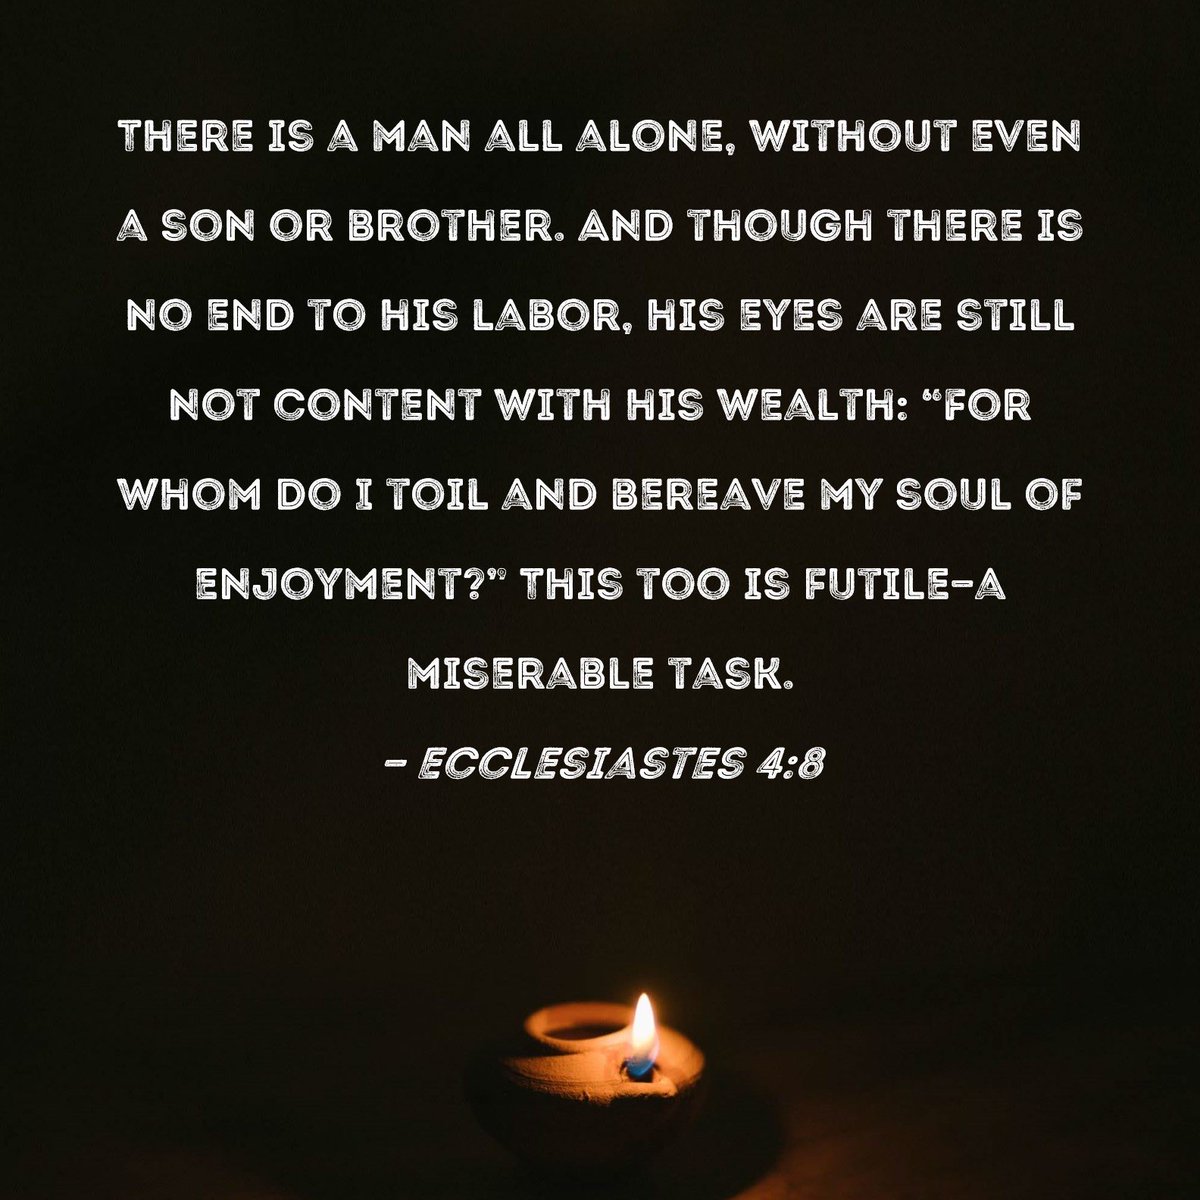 Good Morning Fishers of Men🪝✝️ Ecclesiastes 4 describes a person who is all alone; there’s no end to his toil. It’s good to invest in relationships, which will make your workload lighter & provide help in trouble. Because, ultimately, success without friendship is meaningless.